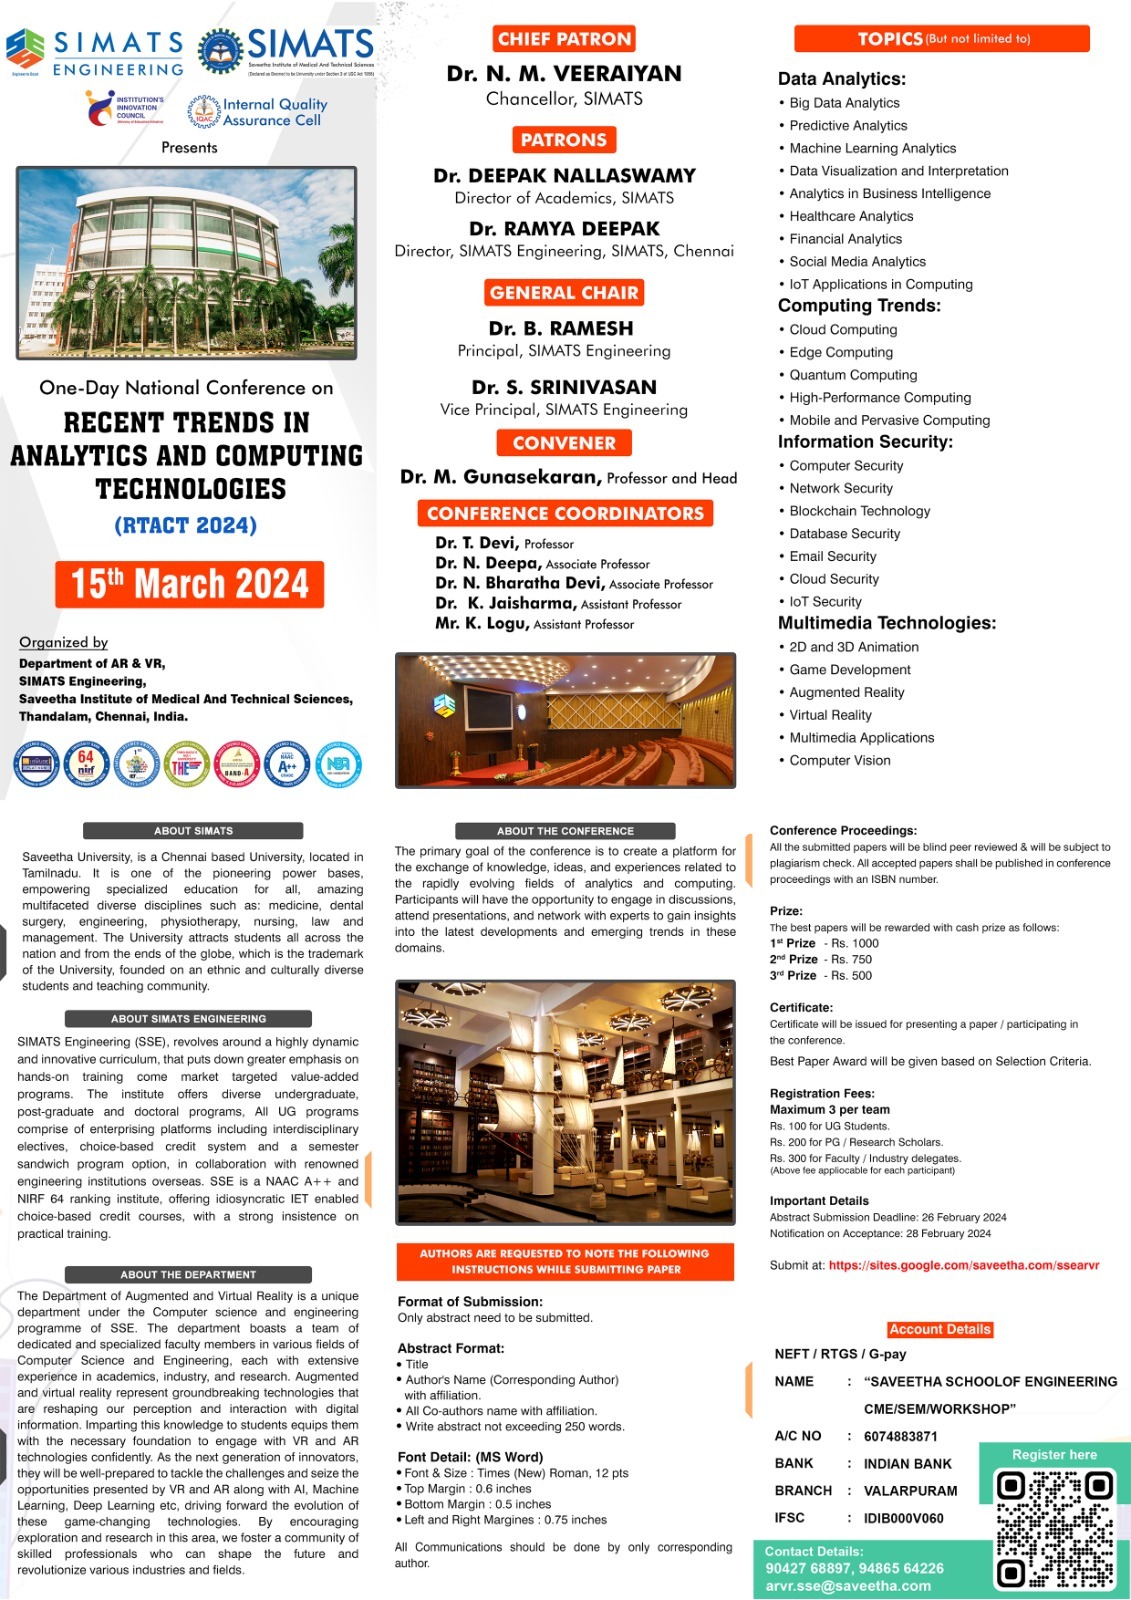 National Conference on "Recent Trends in Analytics and Computing Technologies” (RTACT-2024)